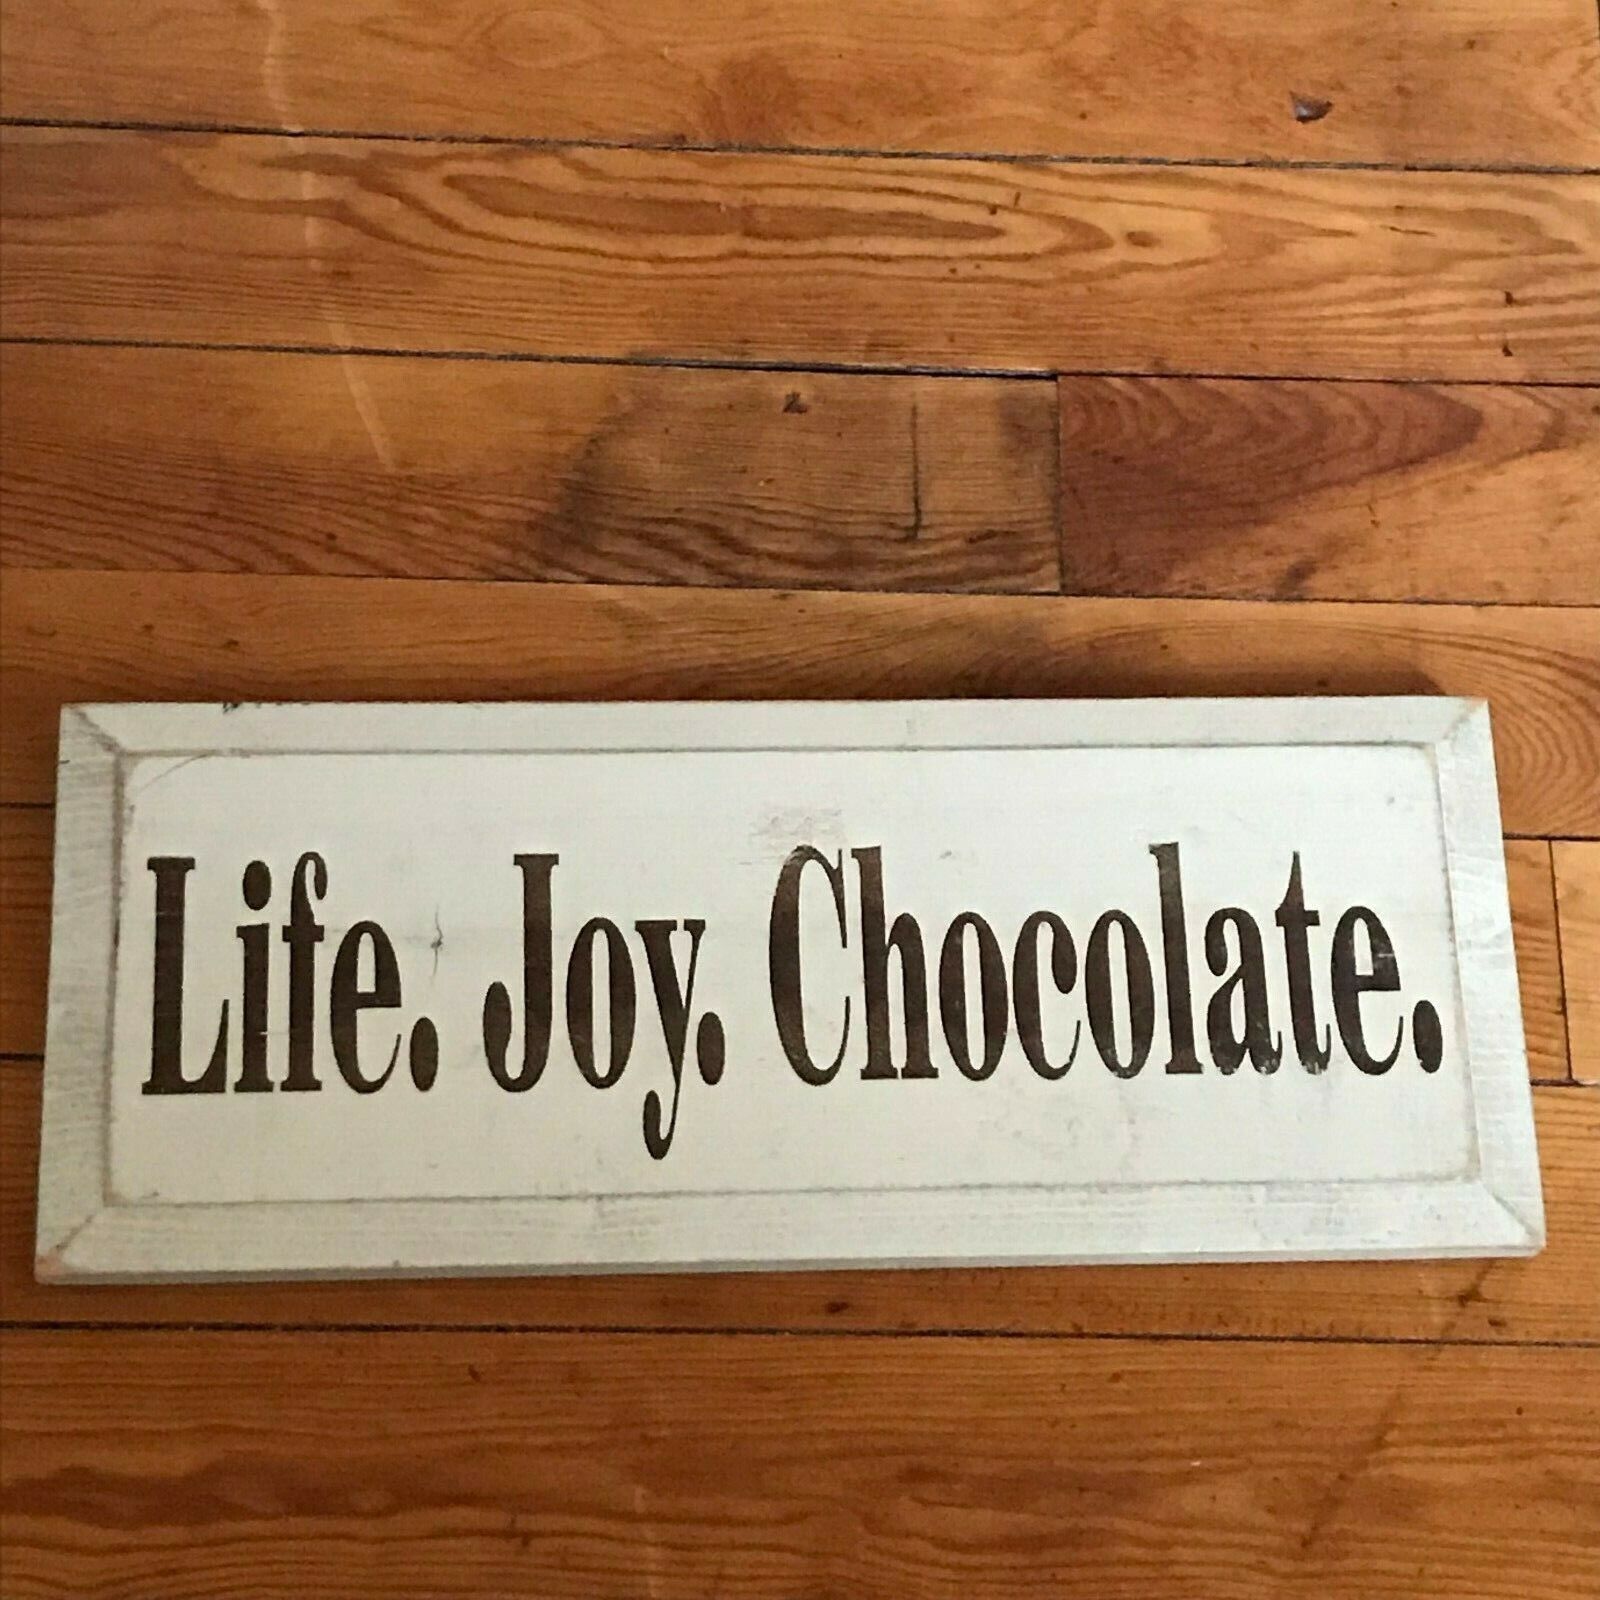 Rustic Cream w Brown Painted Wood LIFE. JOY. CHOCOLATE. Wall Sign Plaque – 